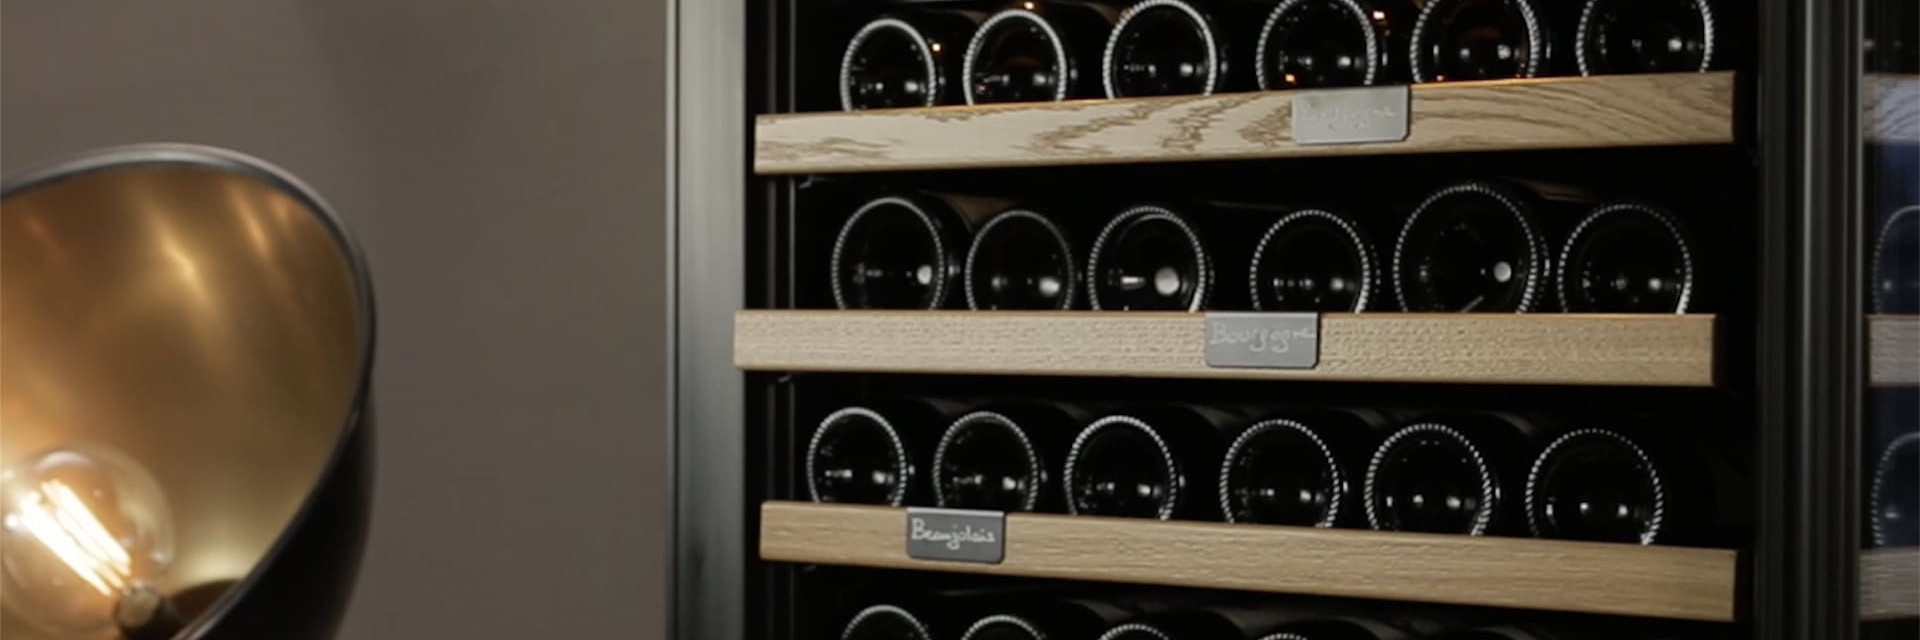 Video tutorial. Step by step installation guide. How to install or change the location of a sliding shelf in a eurocave wine fridge.